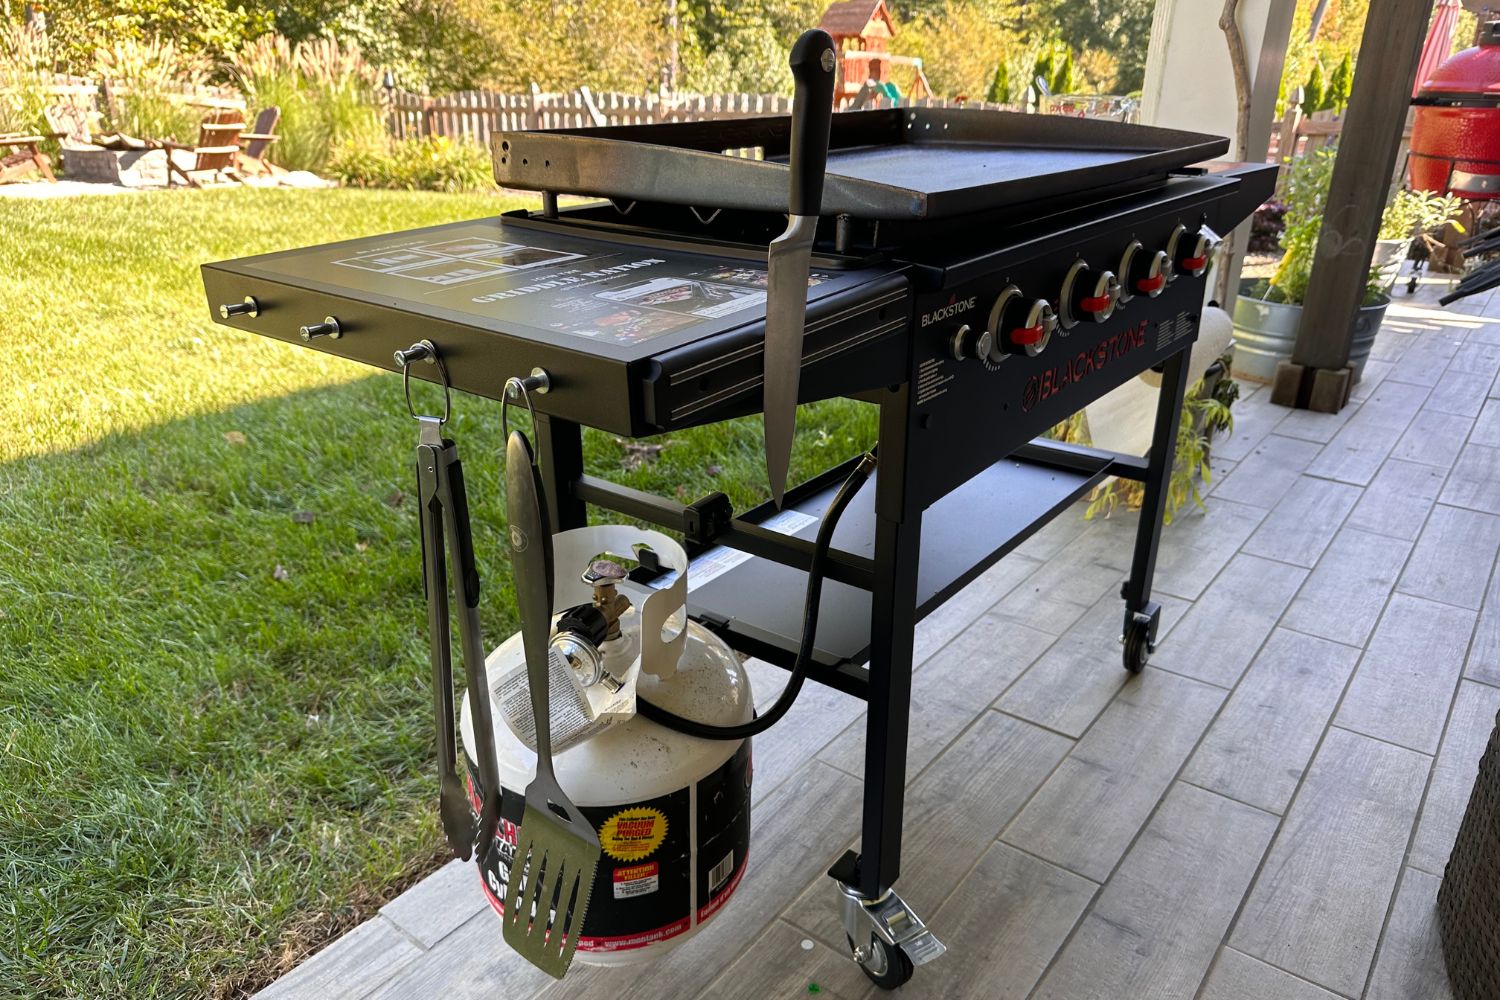 Blackstone 36-inch griddle in backyard with firepit.